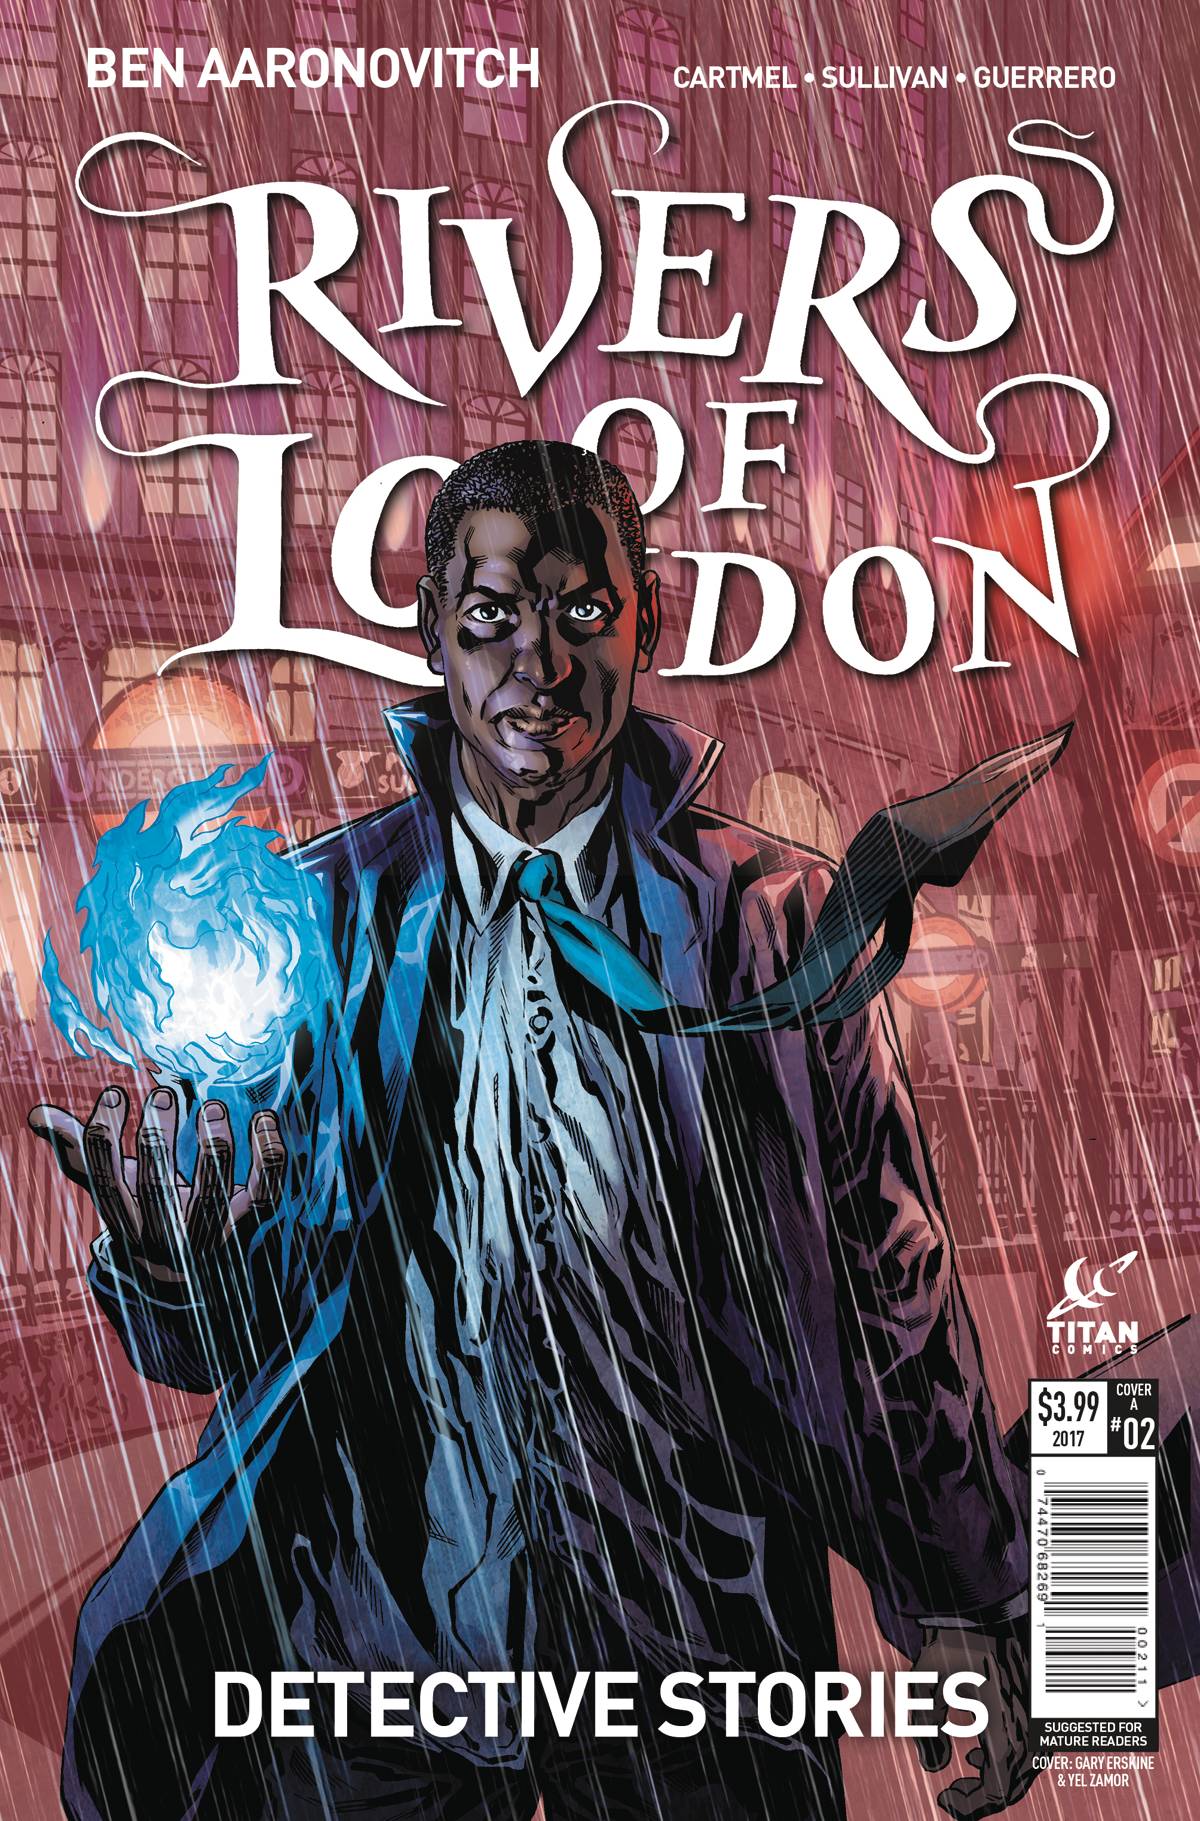 RIVERS OF LONDON: DETECTIVE STORIES#2